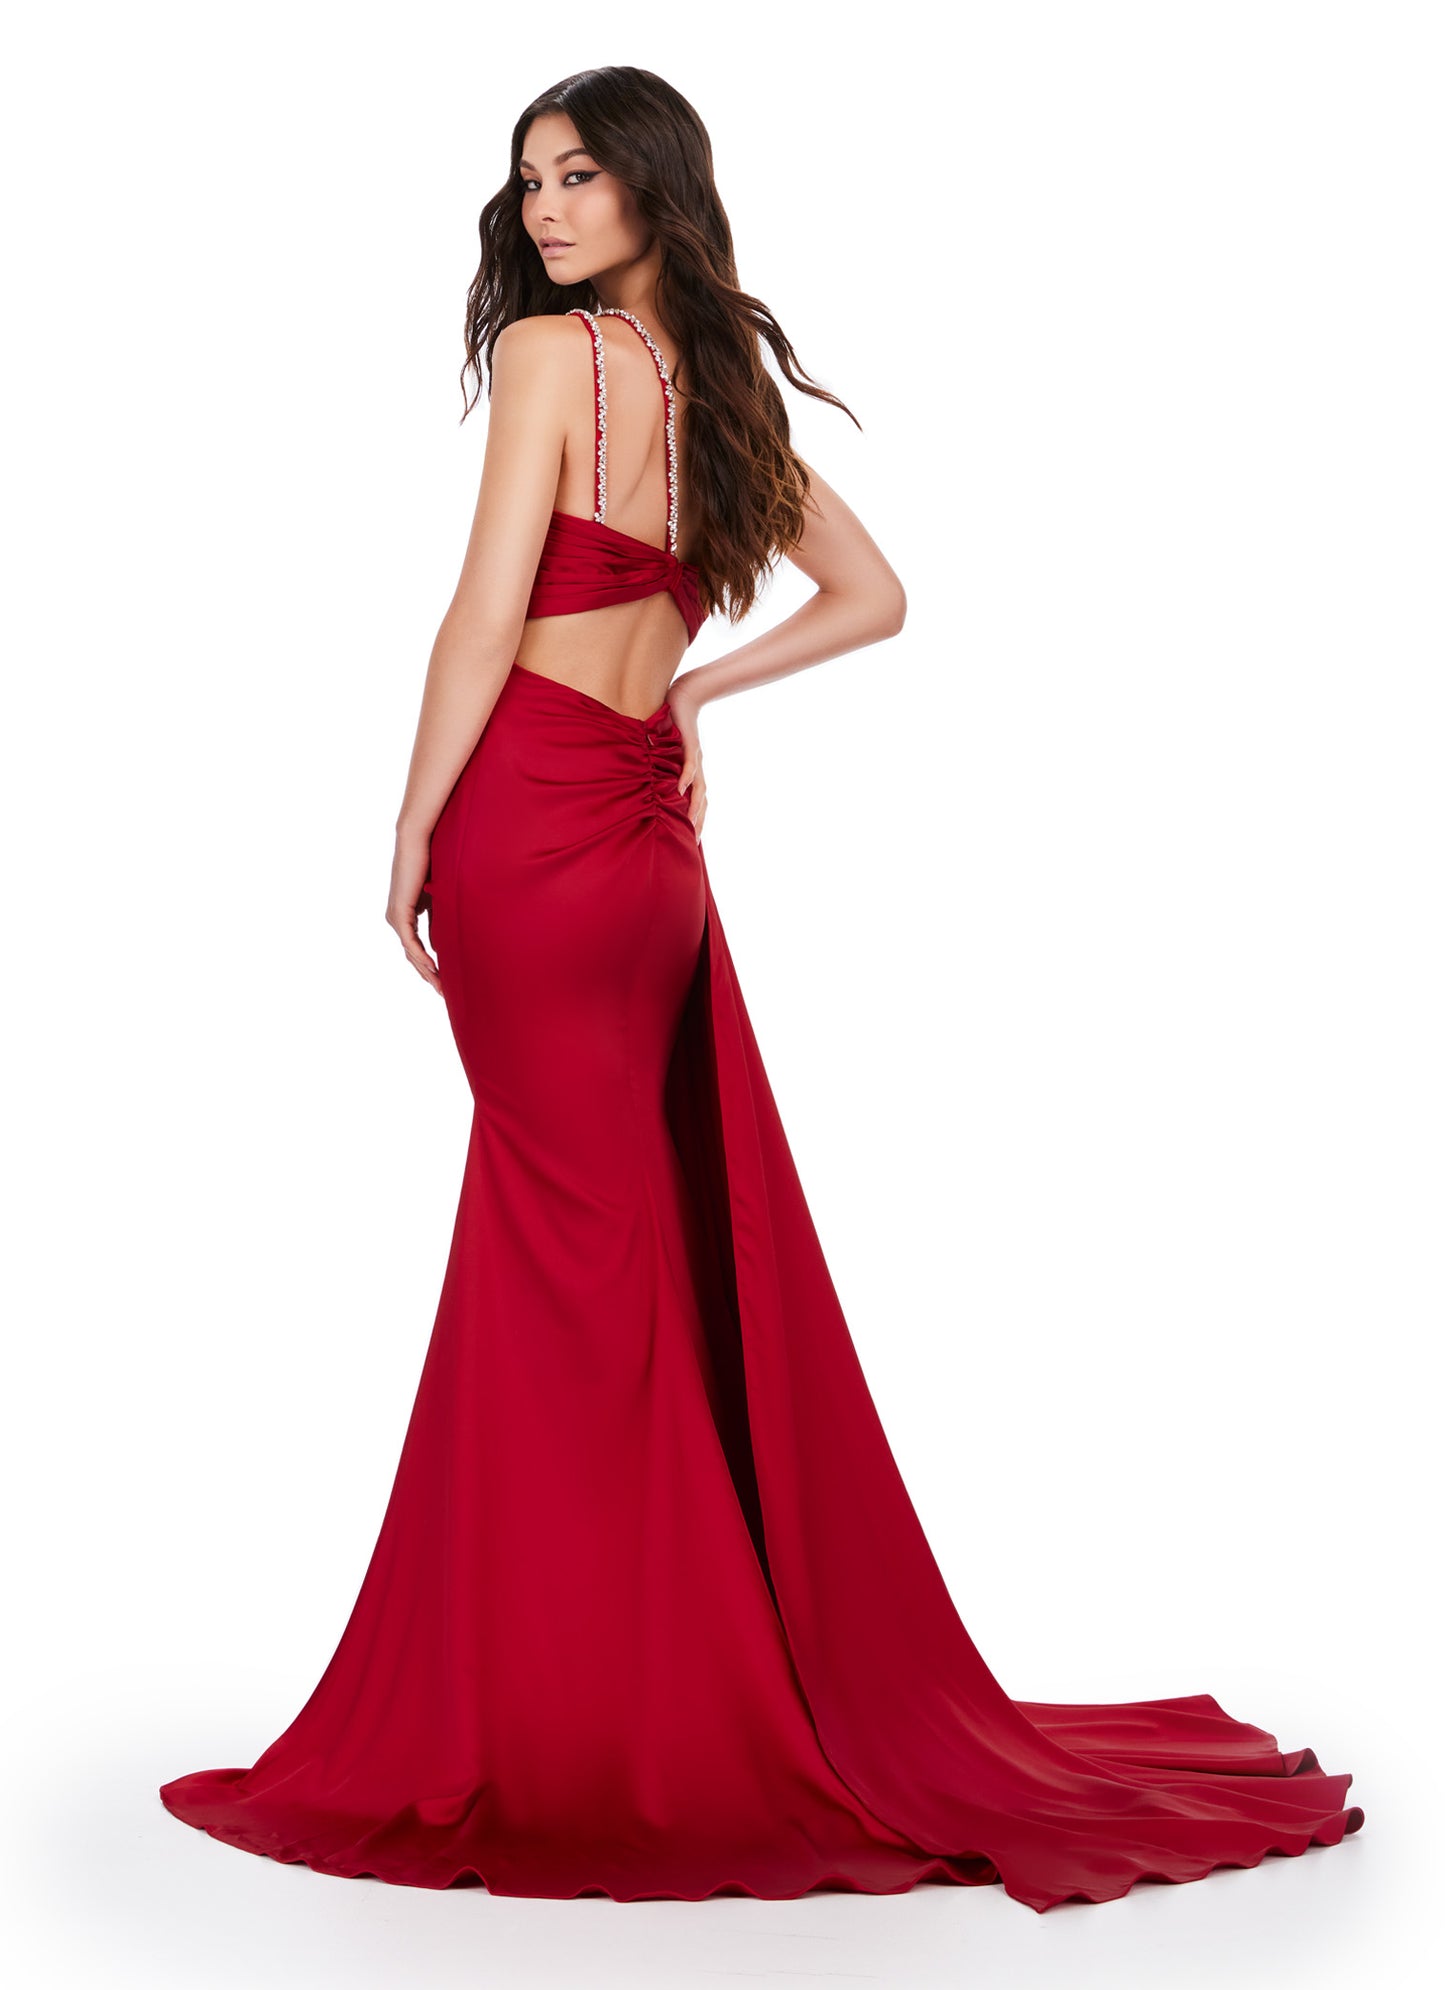 Look stunning in this Ashley Lauren 11537 Long Prom Dress. The one shoulder design and draped satin fabric flatter your figure, while the intricate beading adds a touch of elegance. Perfect for formal events and pageants. Slay at your next event in this one shoulder satin gown. This dress features a draped design with beaded straps and waist accents. The side skirt helps add a touch of glamour.